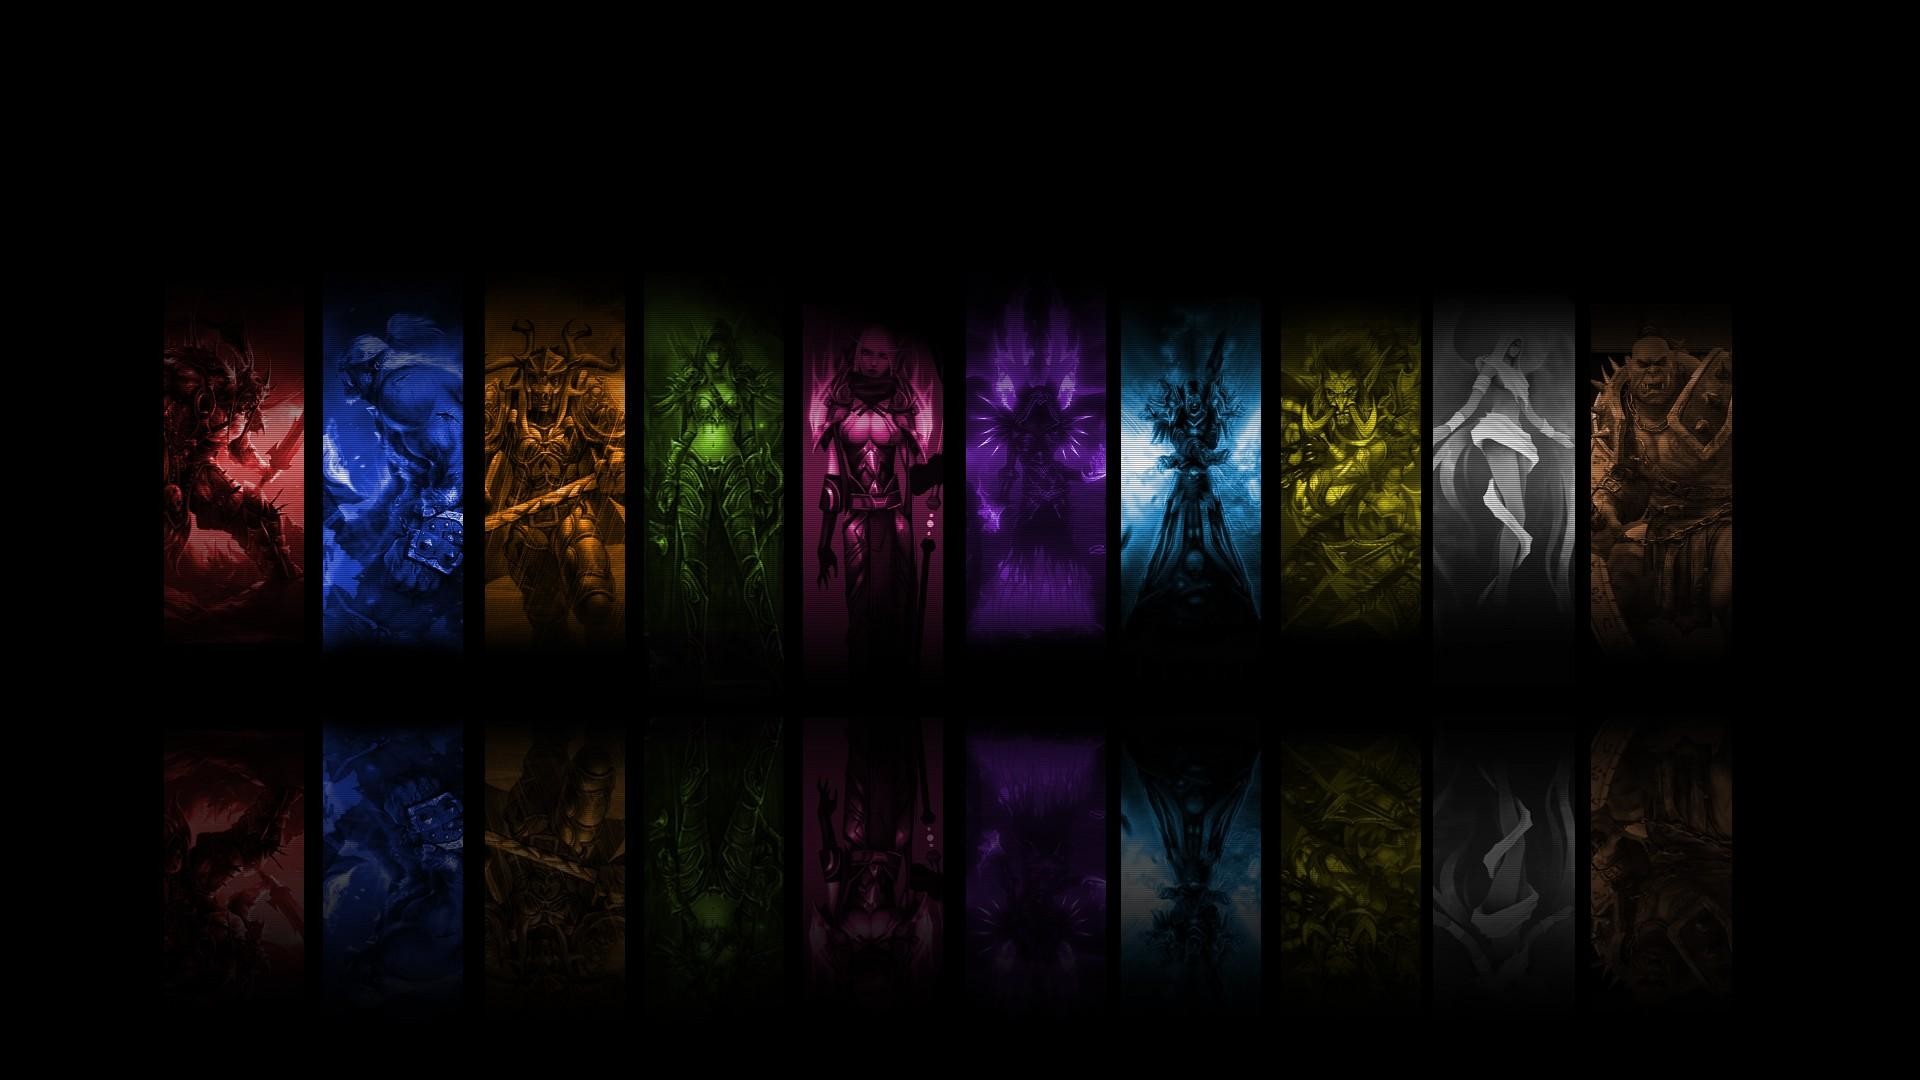 1920x1080 World Of Warcraft Druid Wallpapers Gallery At Freakygaming .